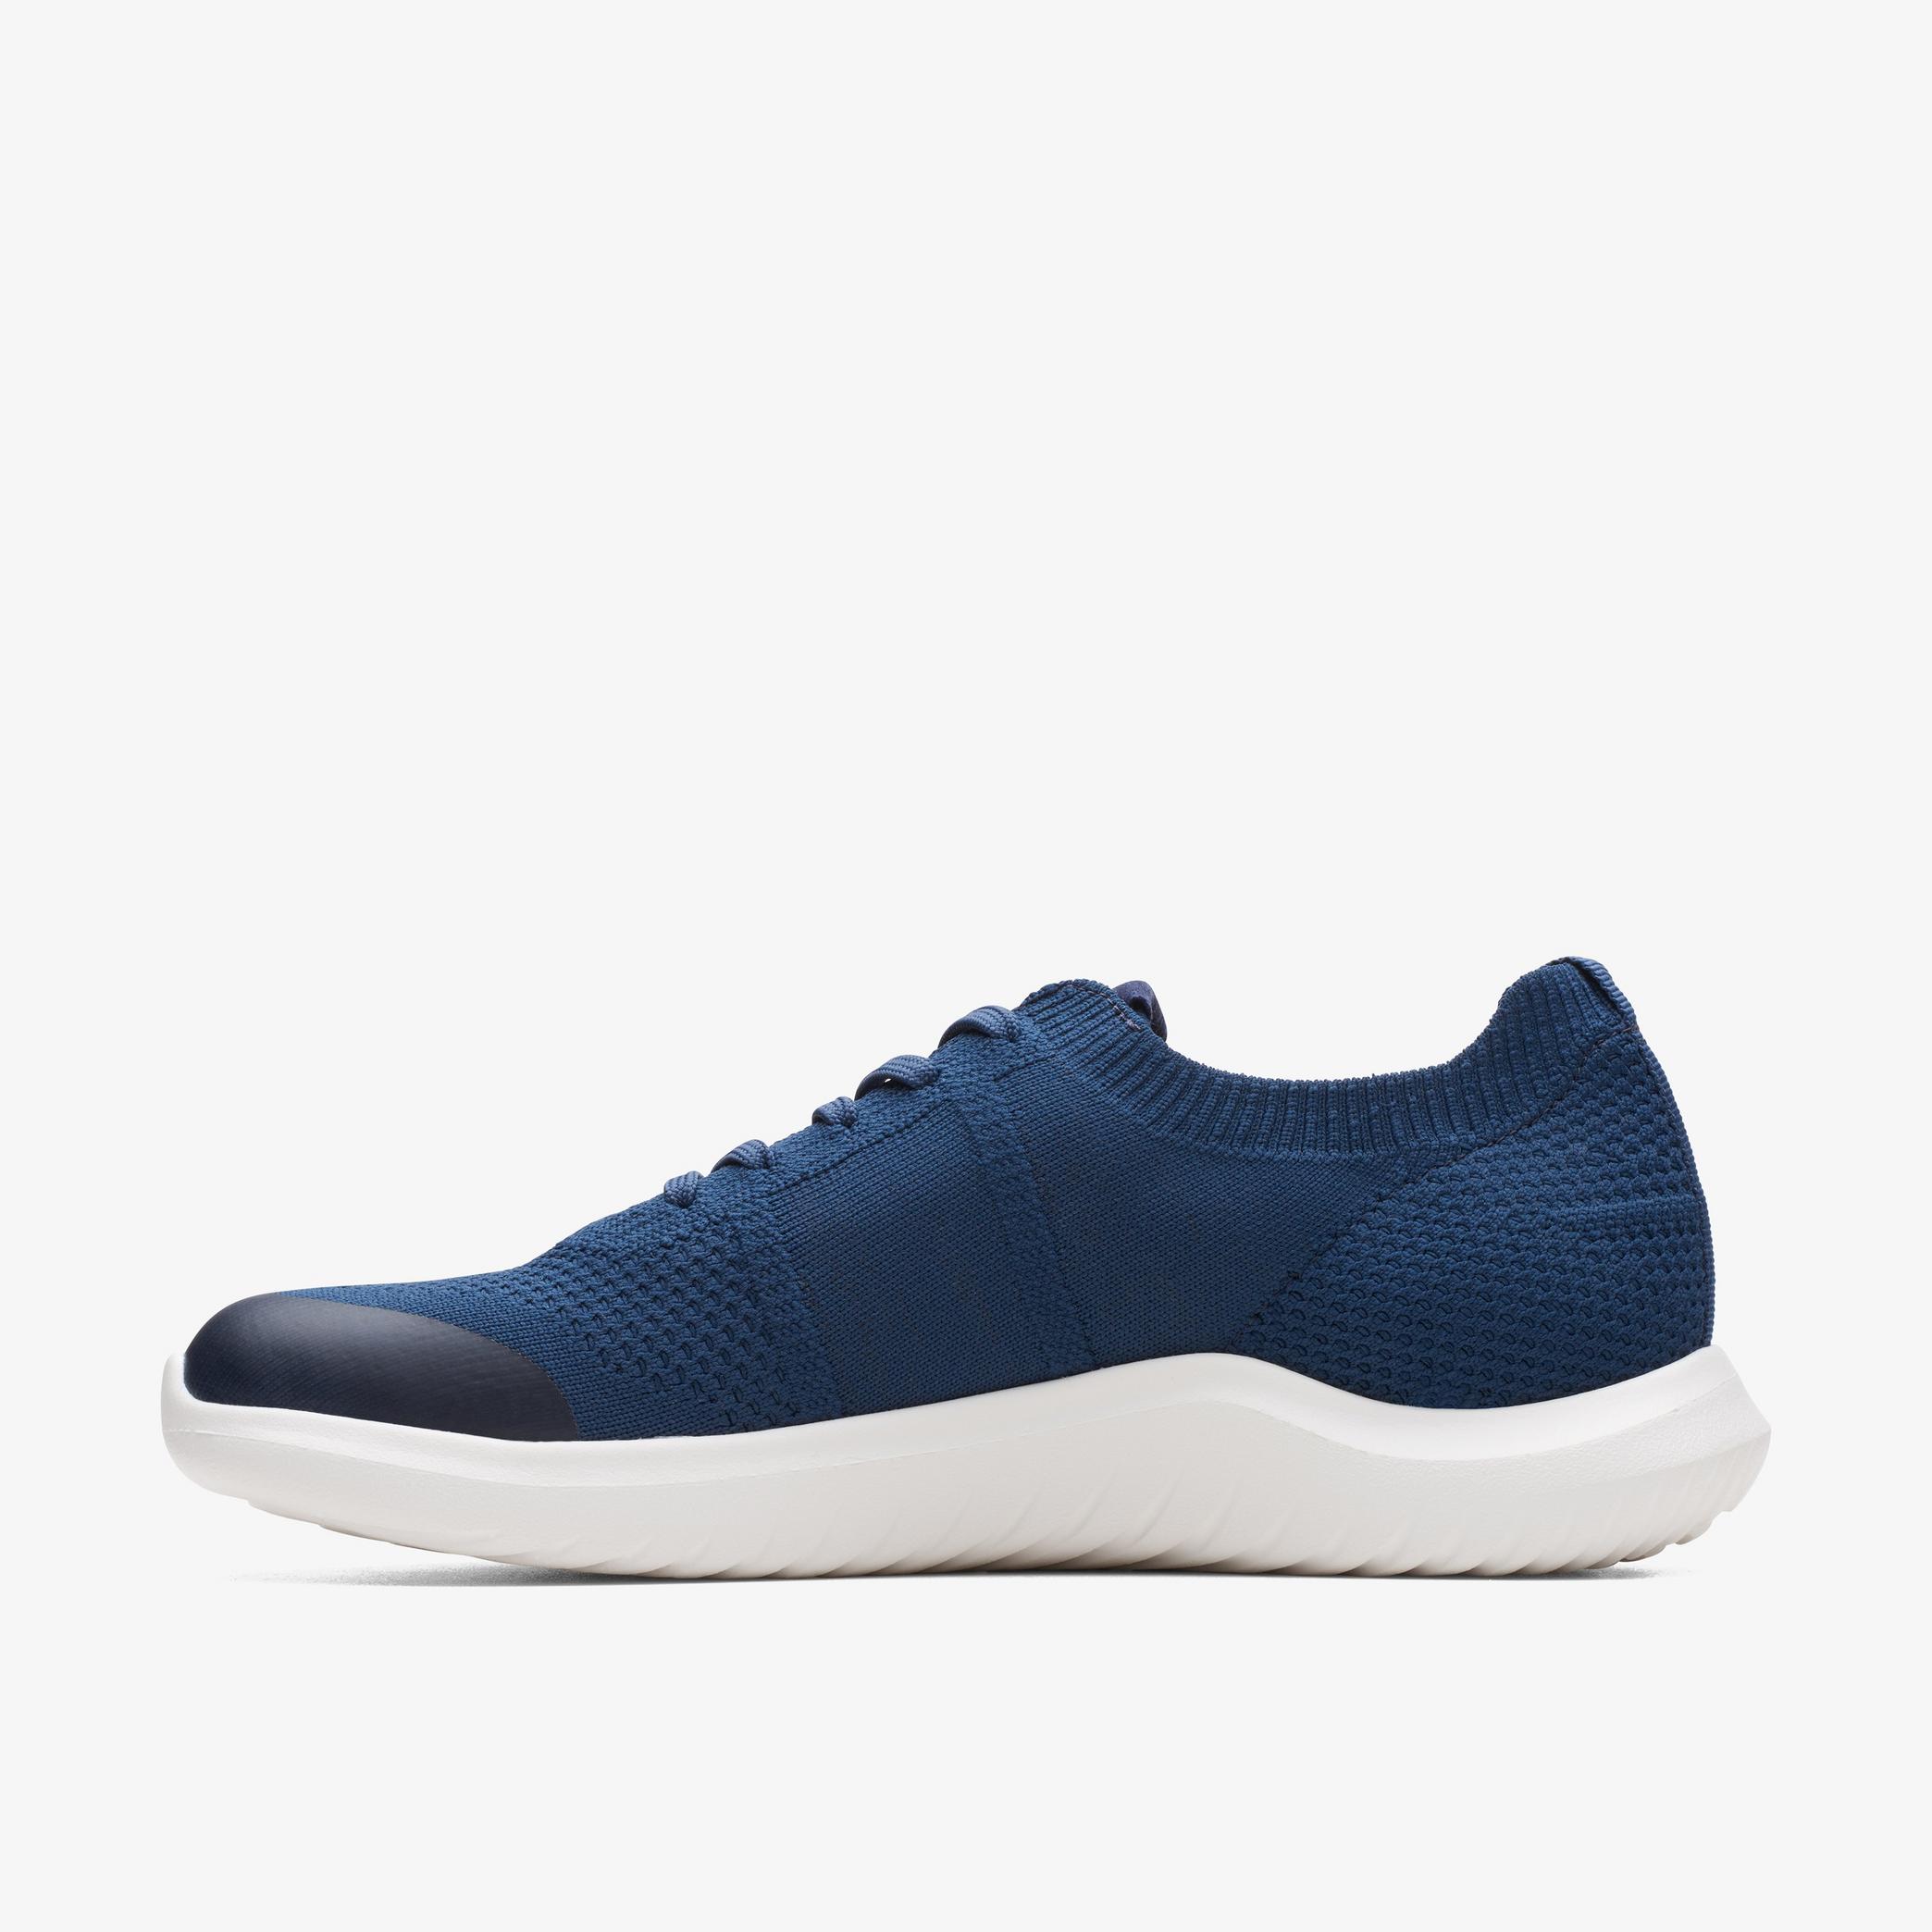 NovaLite Lace Navy Knit Trainers, view 2 of 6